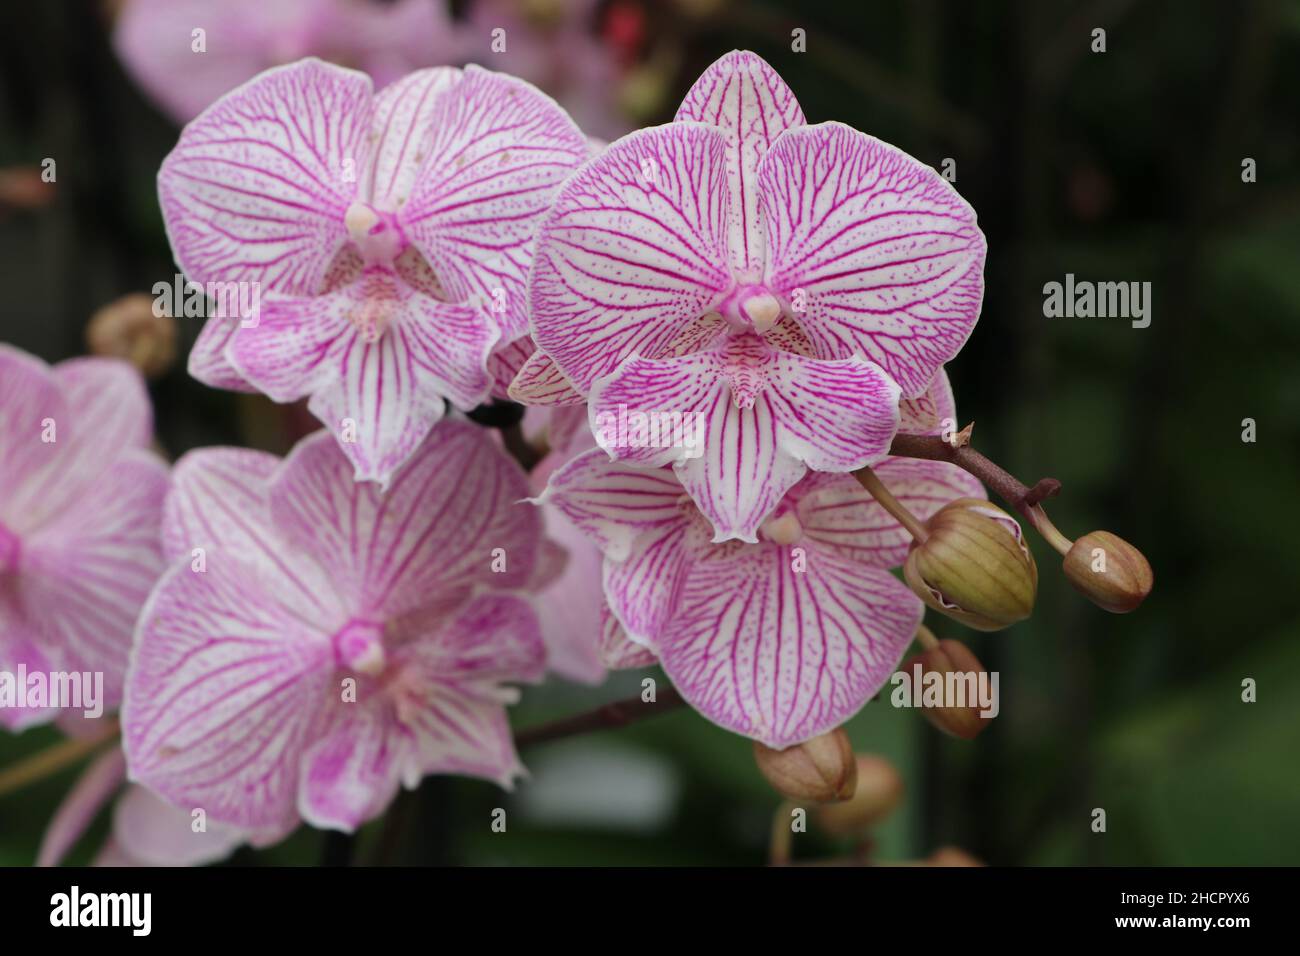 white pink striped phalaenopsis orchid flowers close up Stock Photo